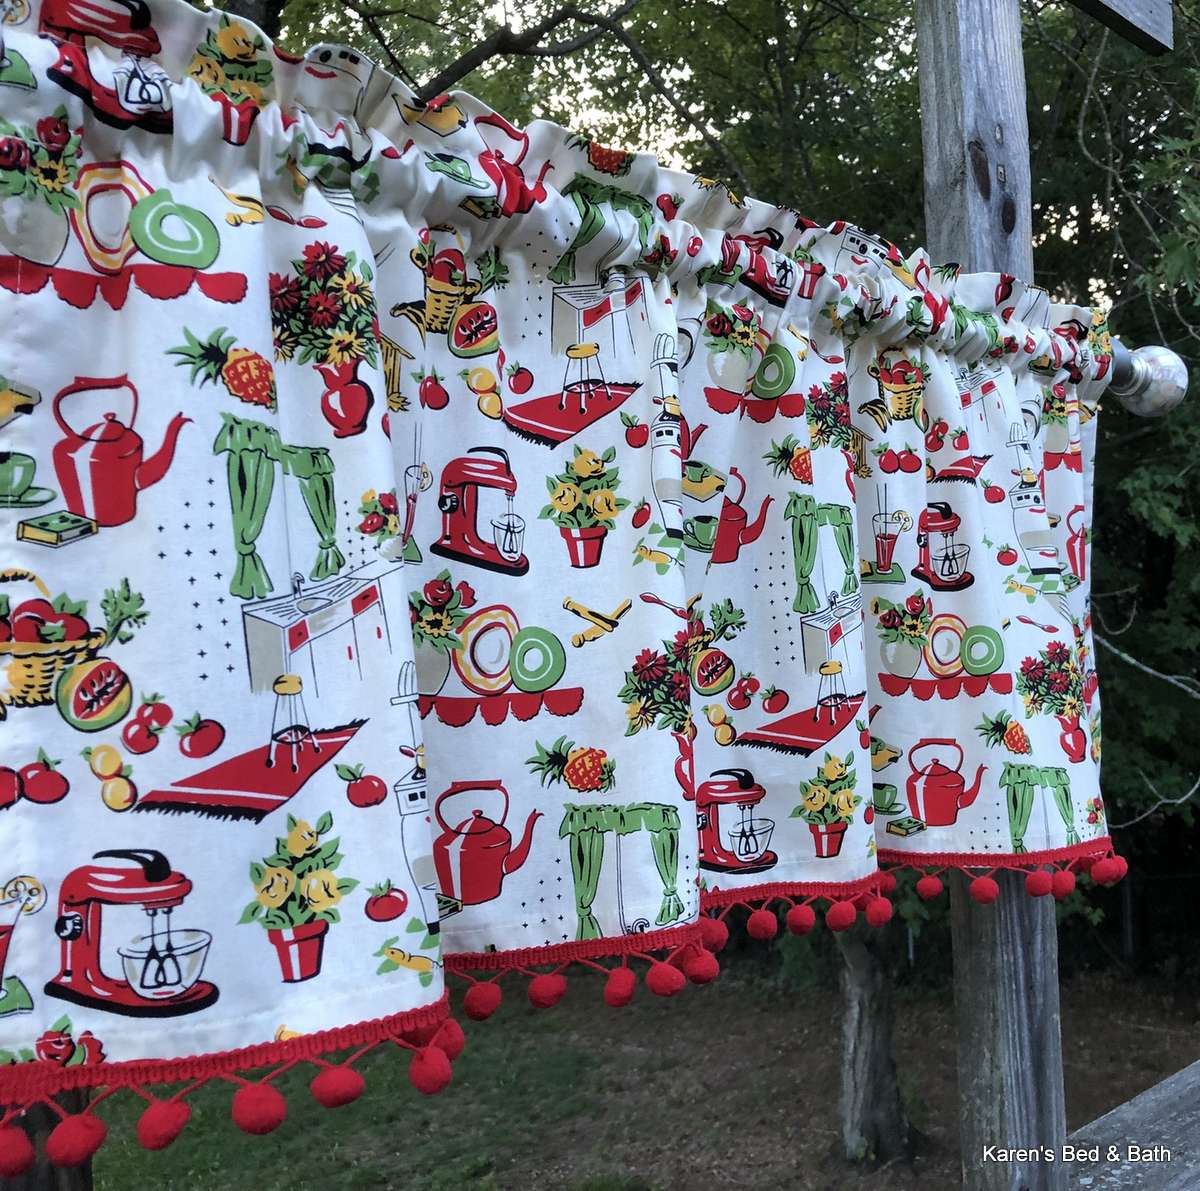 Retro Vintage Fifties Kitchen Valance 50s Farmhouse Red Green Cream Handcrafted Curtain Valance With Pom Pom Trim